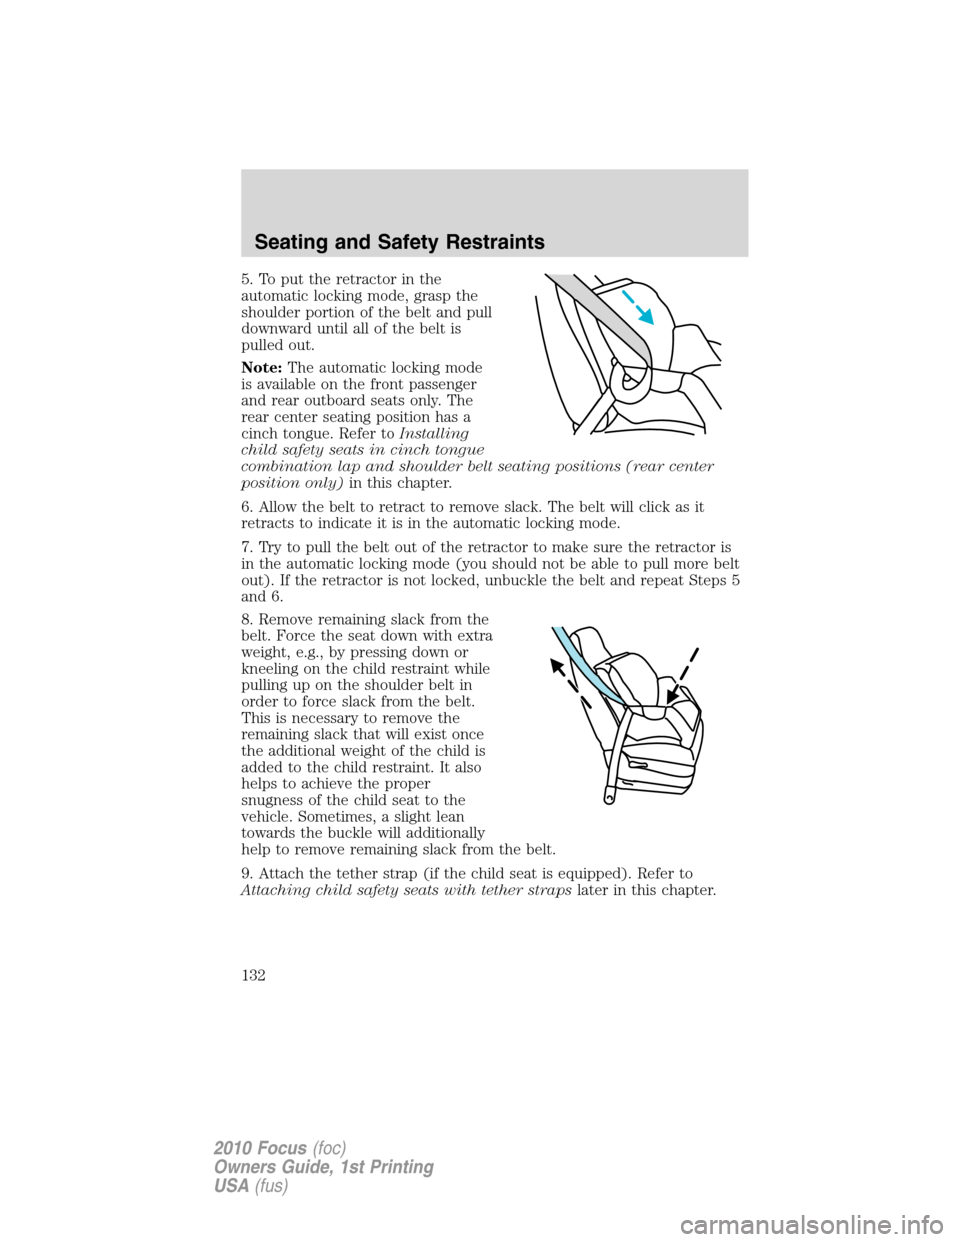 FORD FOCUS 2010 2.G Owners Manual 5. To put the retractor in the
automatic locking mode, grasp the
shoulder portion of the belt and pull
downward until all of the belt is
pulled out.
Note:The automatic locking mode
is available on the